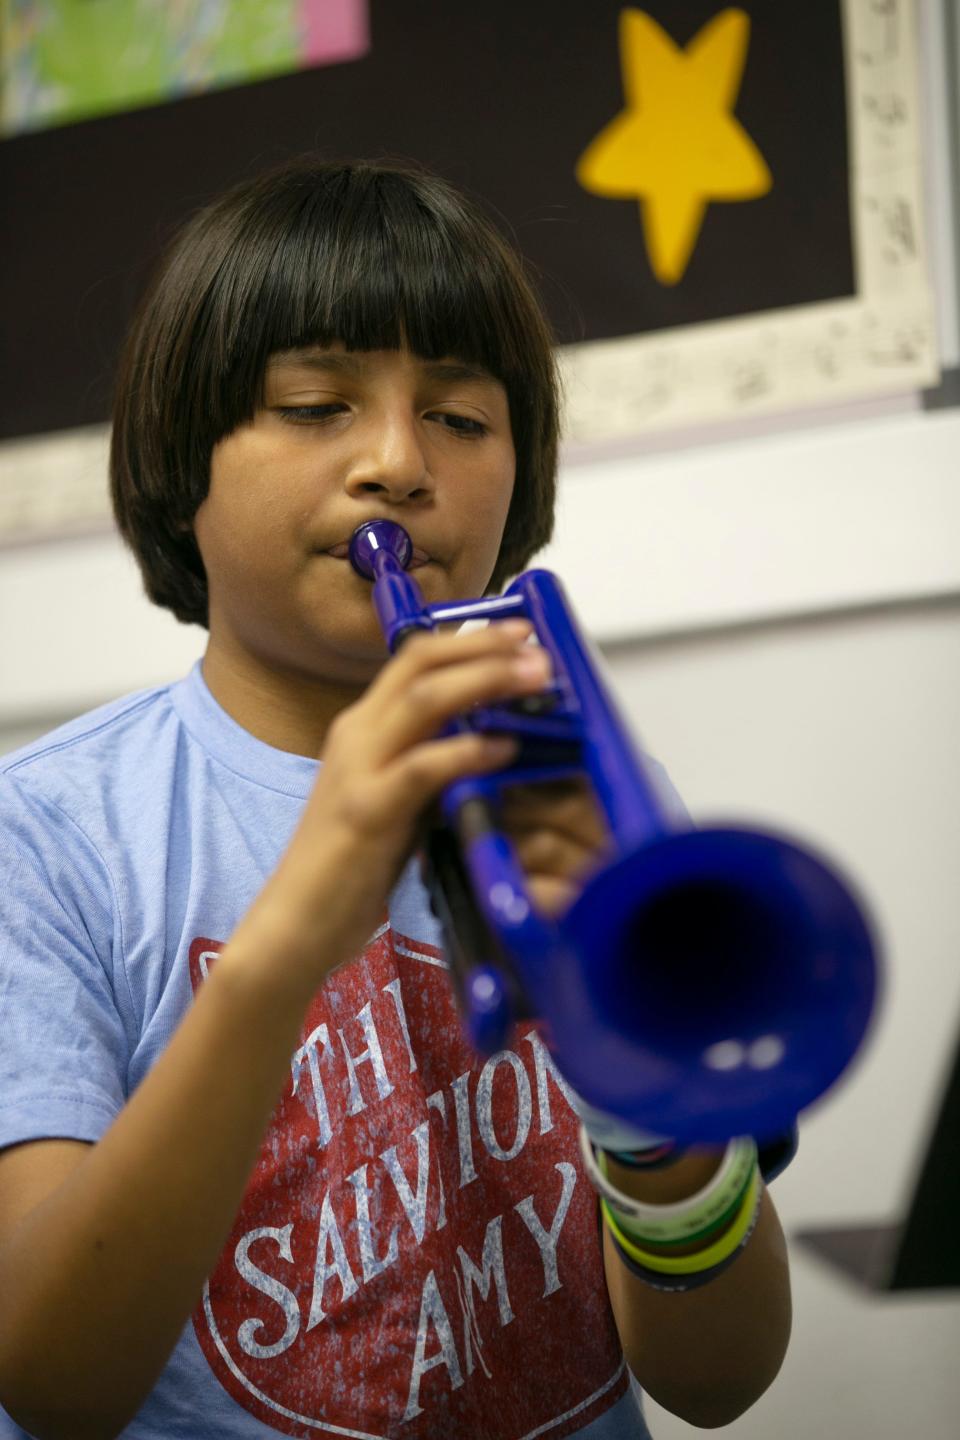 Cesar Gonzalez, 12, plays the trumpet. Children of Asbury Park are offered free music lessons through a program at the Salvation Army.    Asbury Park, NJThursday, November 17, 2022